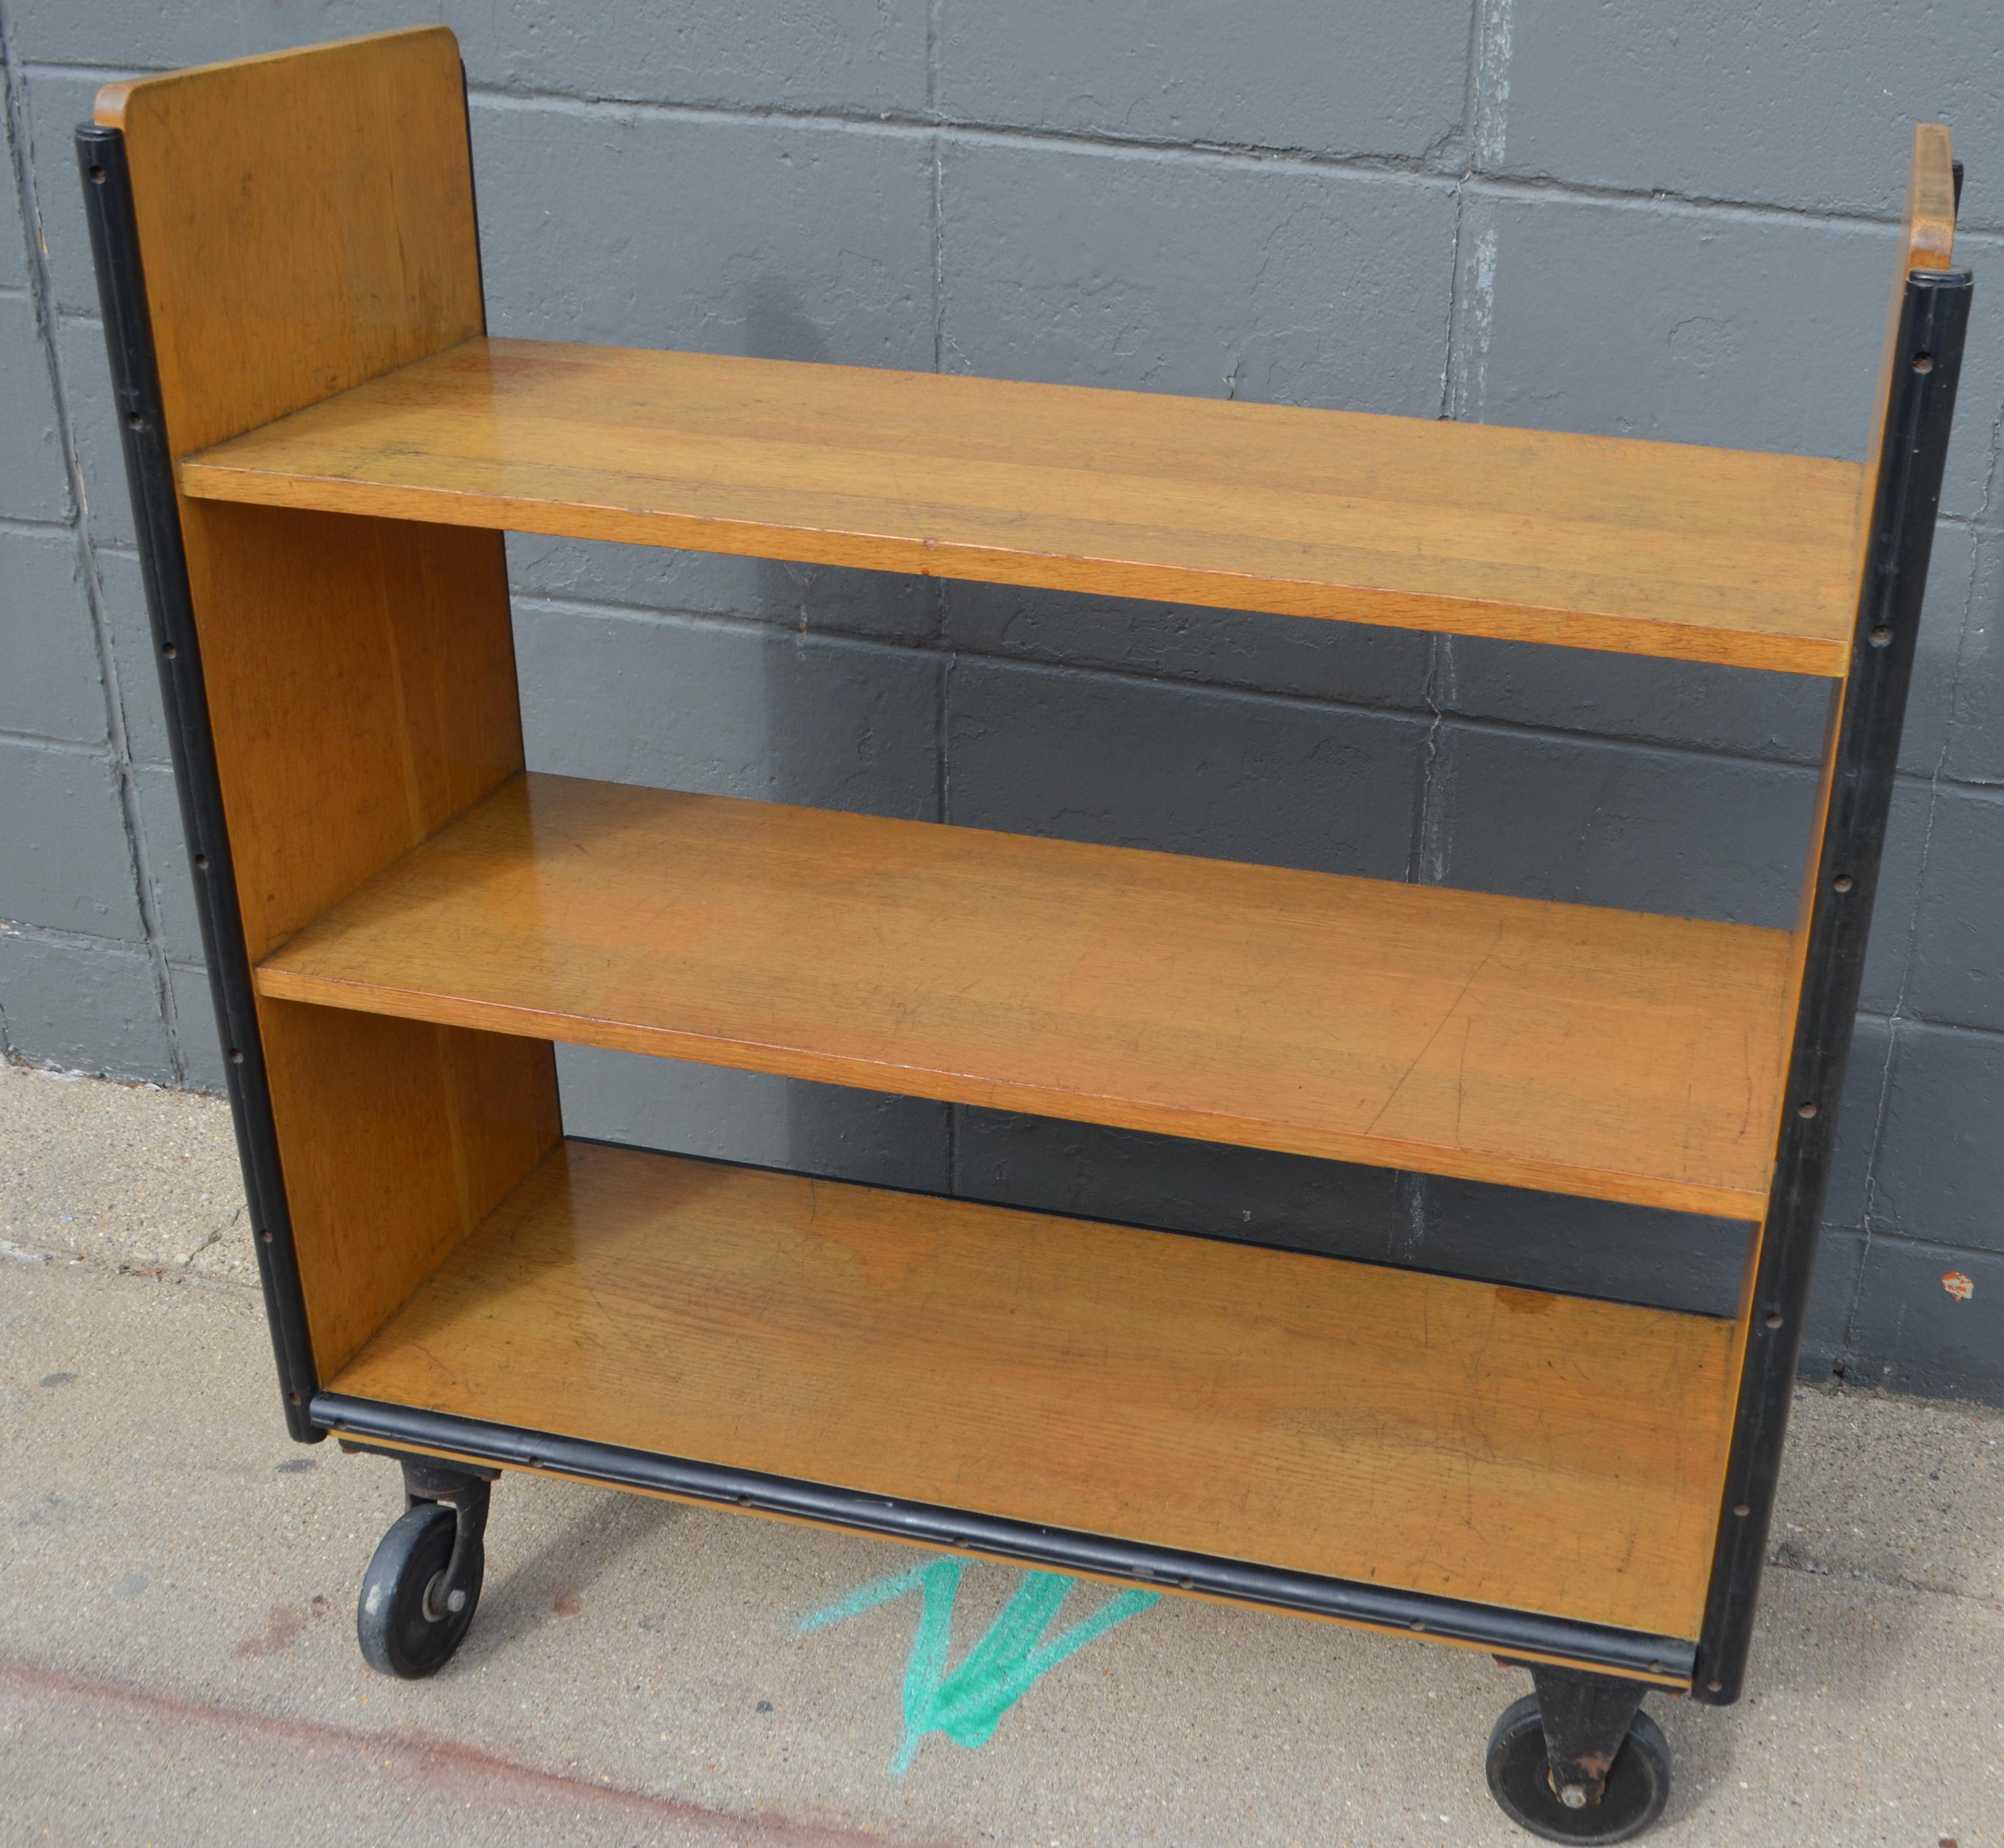 Midcentury Book Shelving Cart of Oak on Wheels from Midwestern Public Library 1